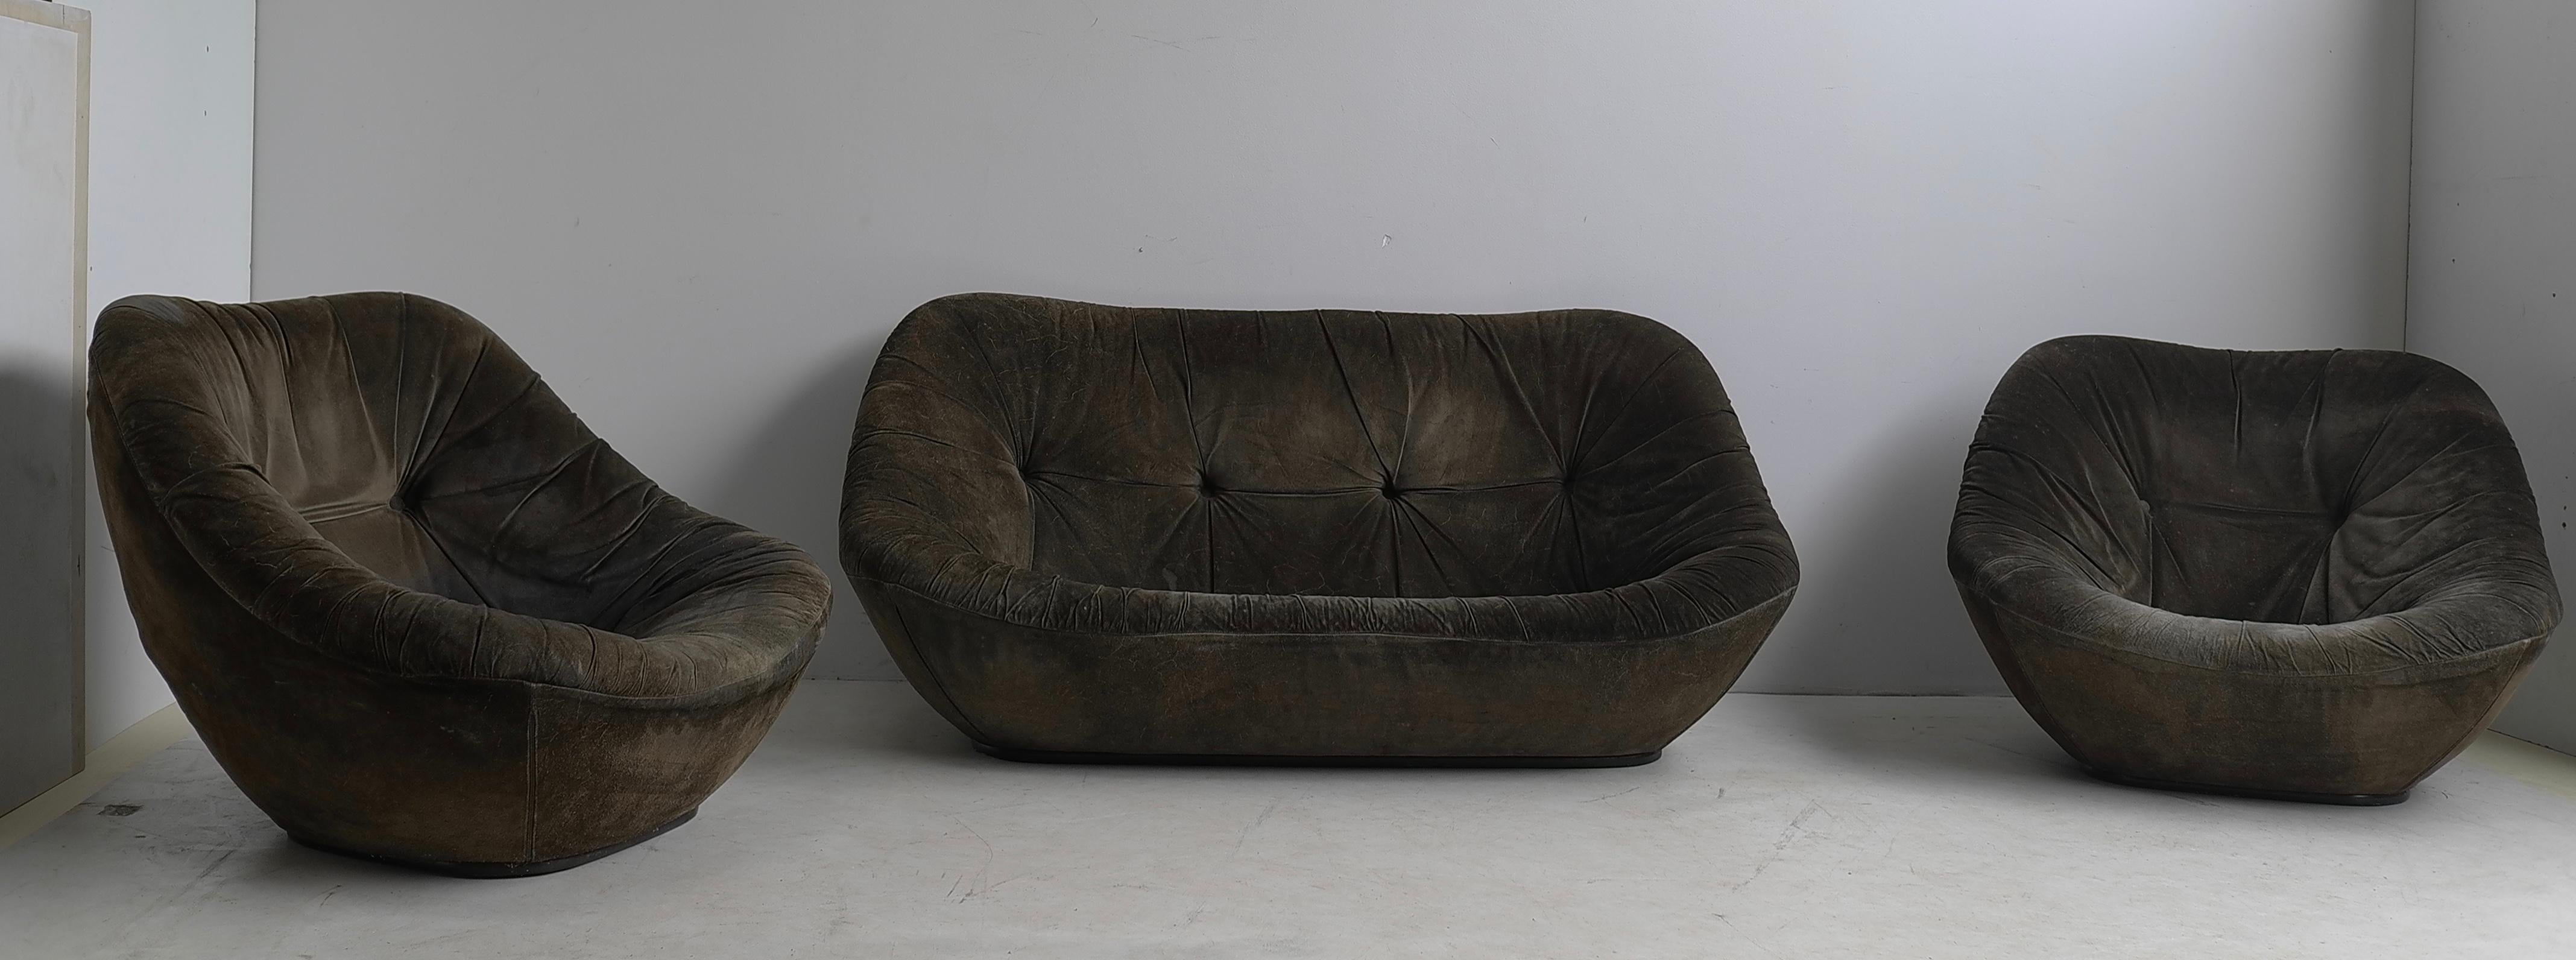 Important salon, Pierre Paulin sofa with two armchairs model bonnie 500 and 500/2 in suede savannah, sitting on a cloud. The sofa 500/2 is described in the Artifort books but seldom one for sale, museum piece. Concept: Sitting on a cloud, very